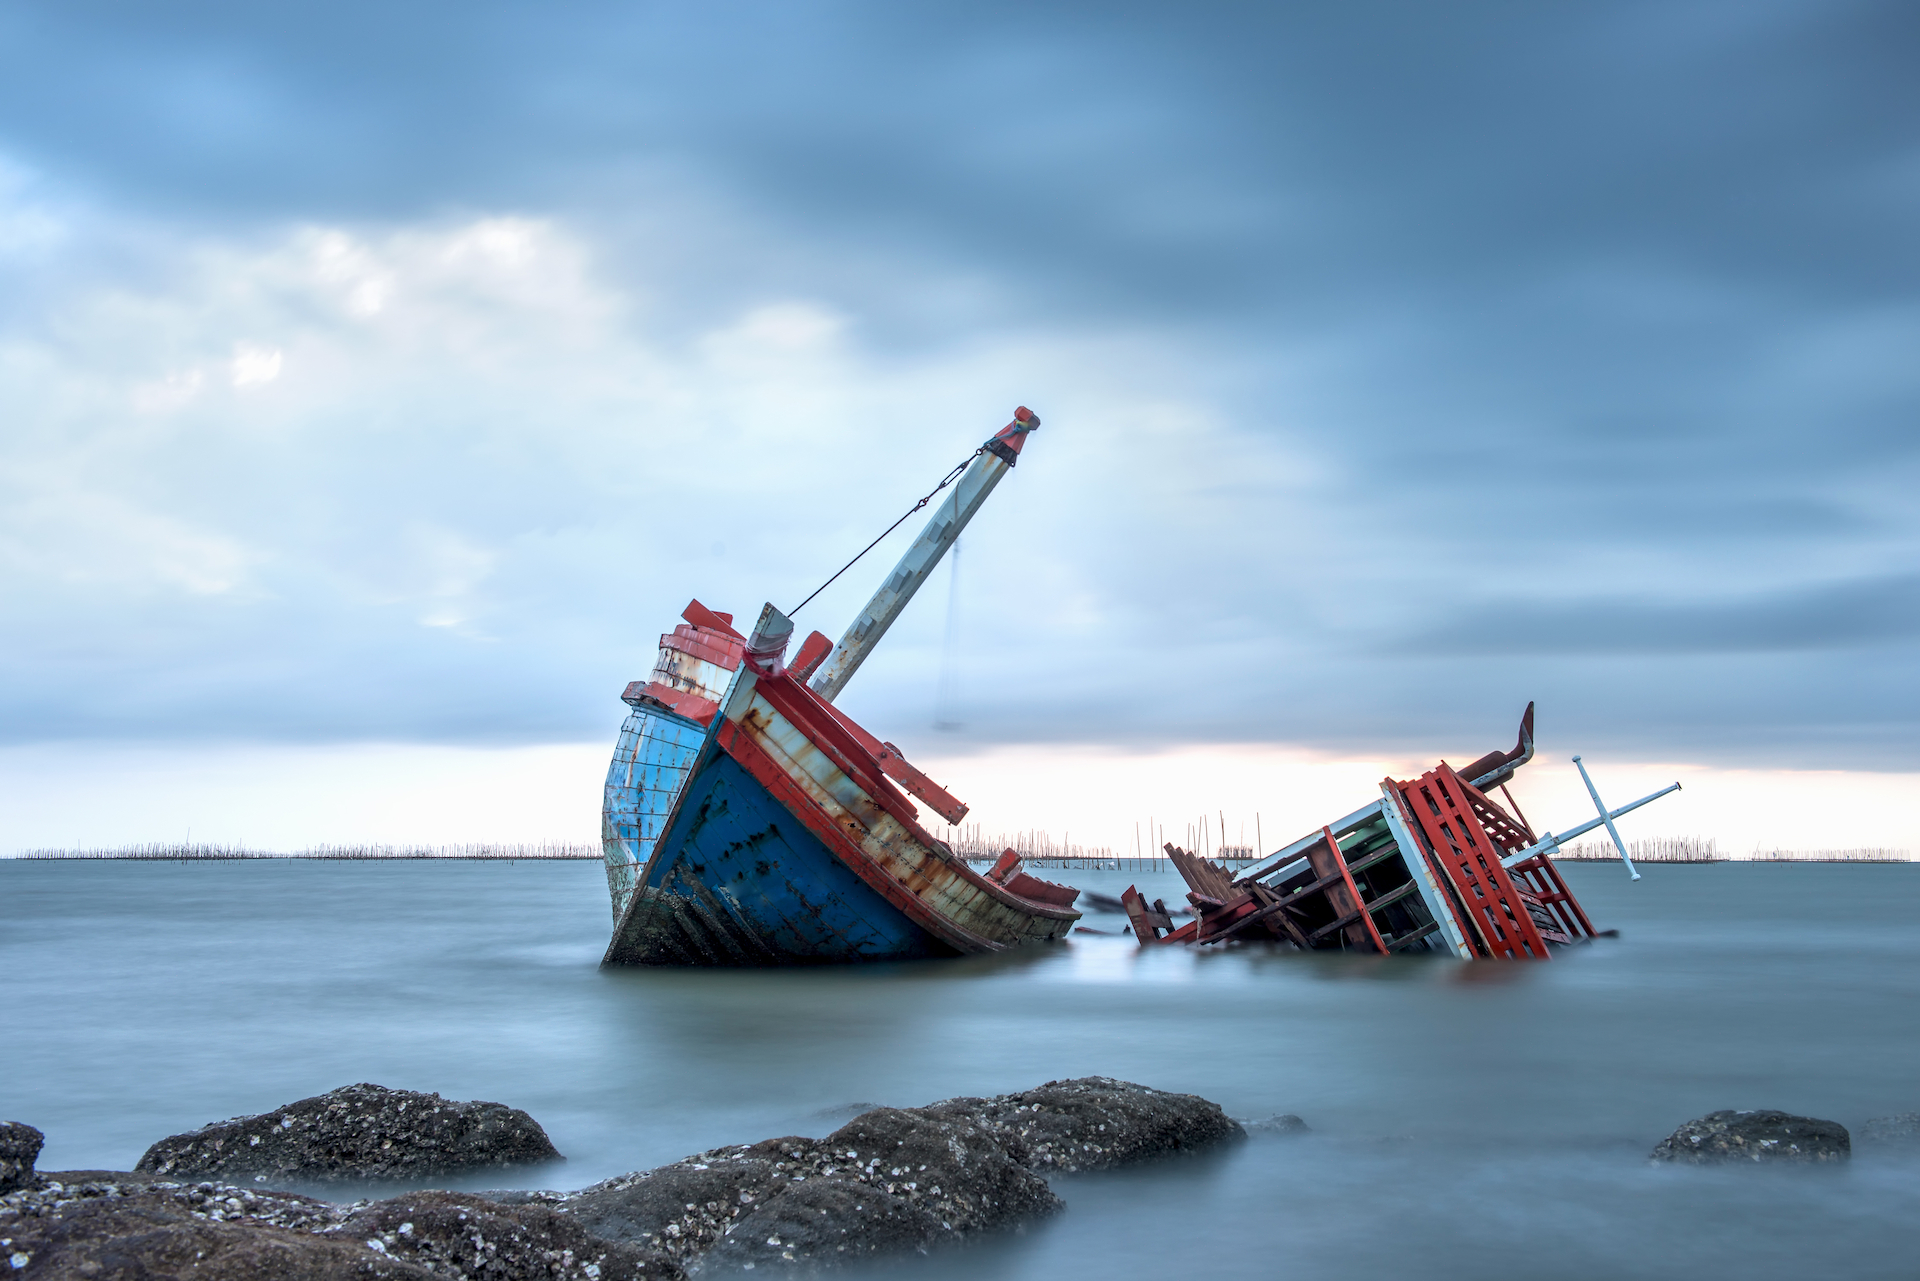 wrecked-abandoned-or-hazardous-vessels-act-india-global-law-firm